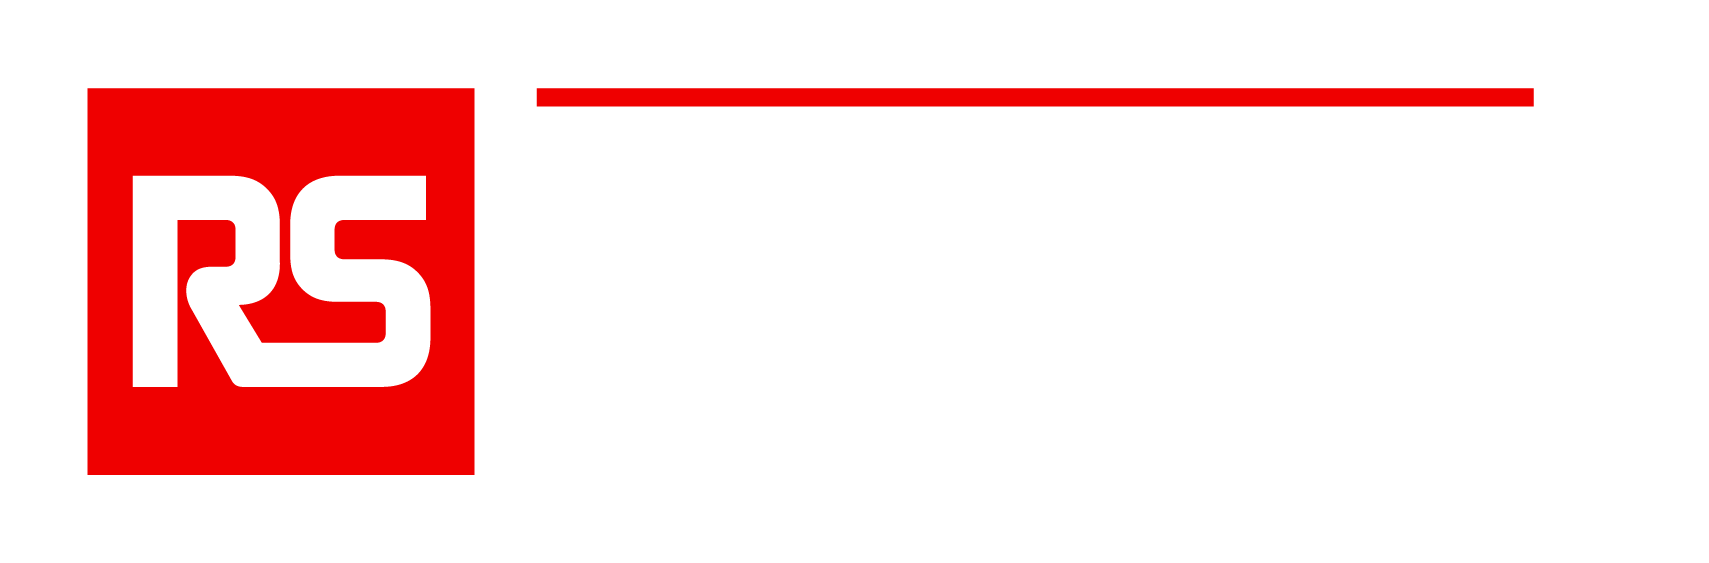 RS Integrated Supply White Logo